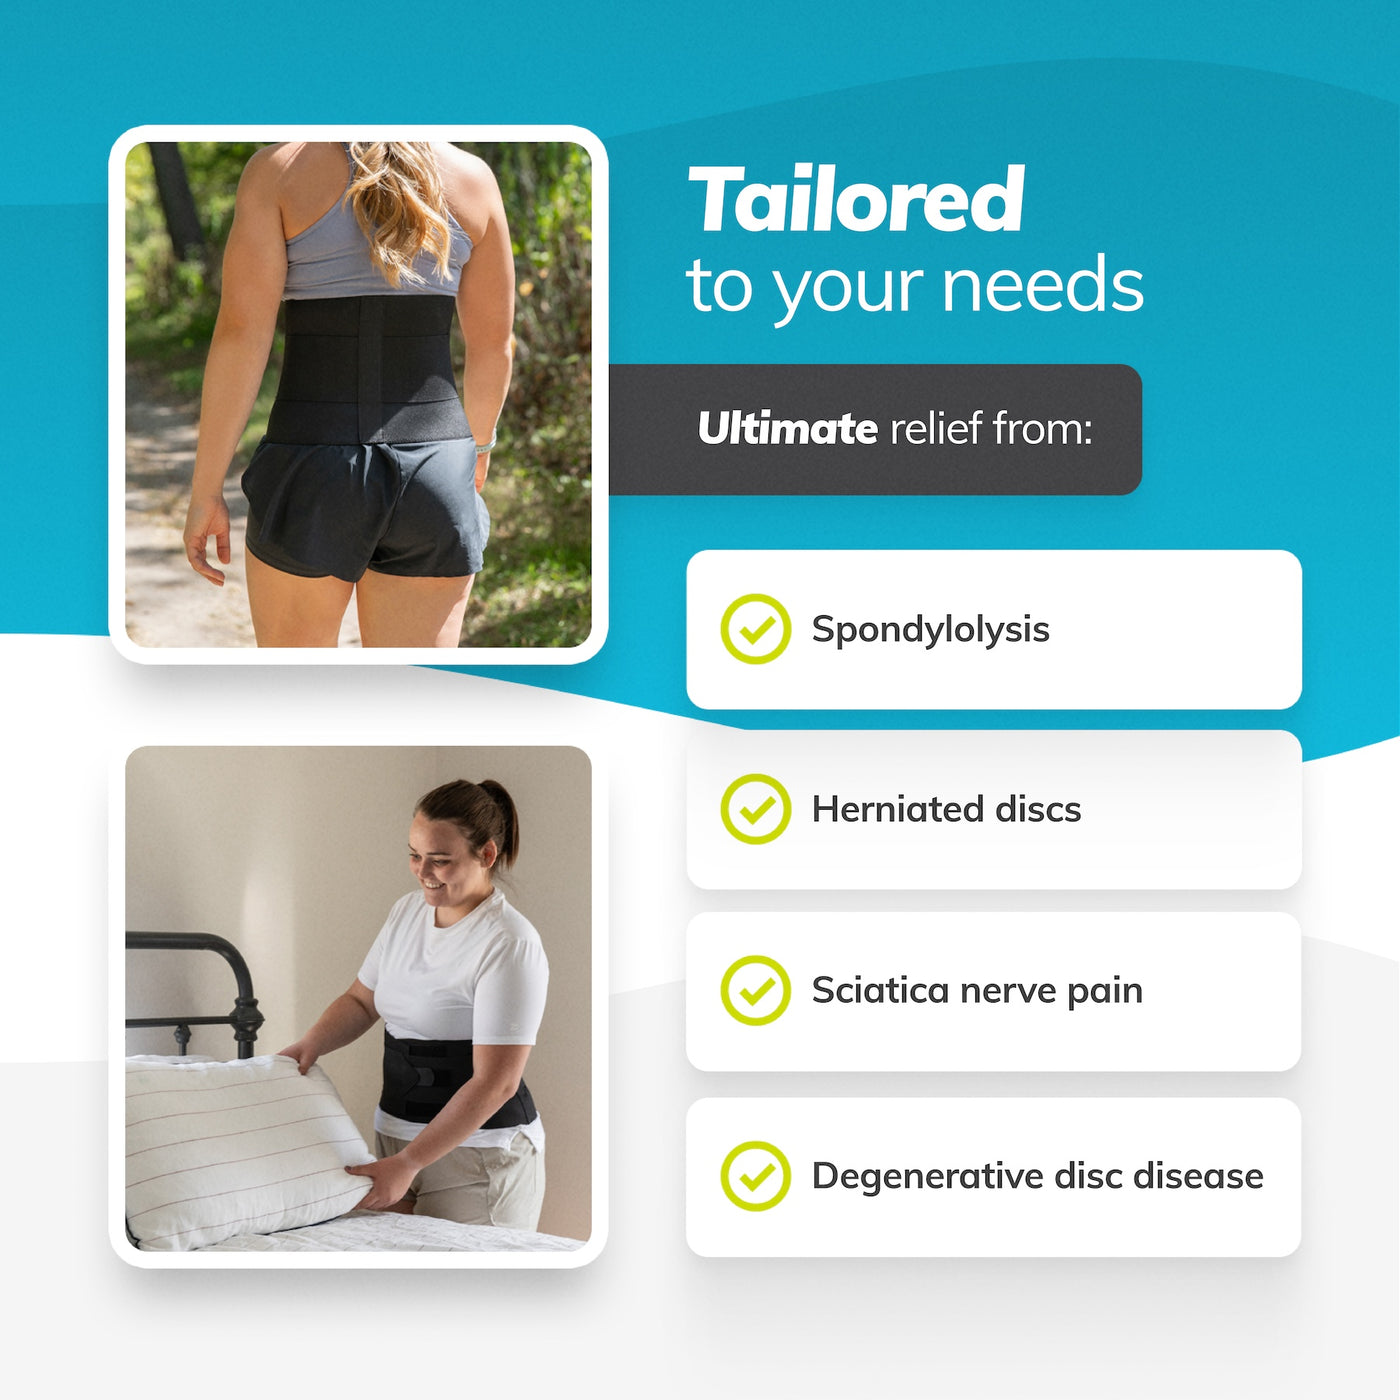 The lower back brace for chronic pain relief from sciatica and pinched nerves is 9 inches tall